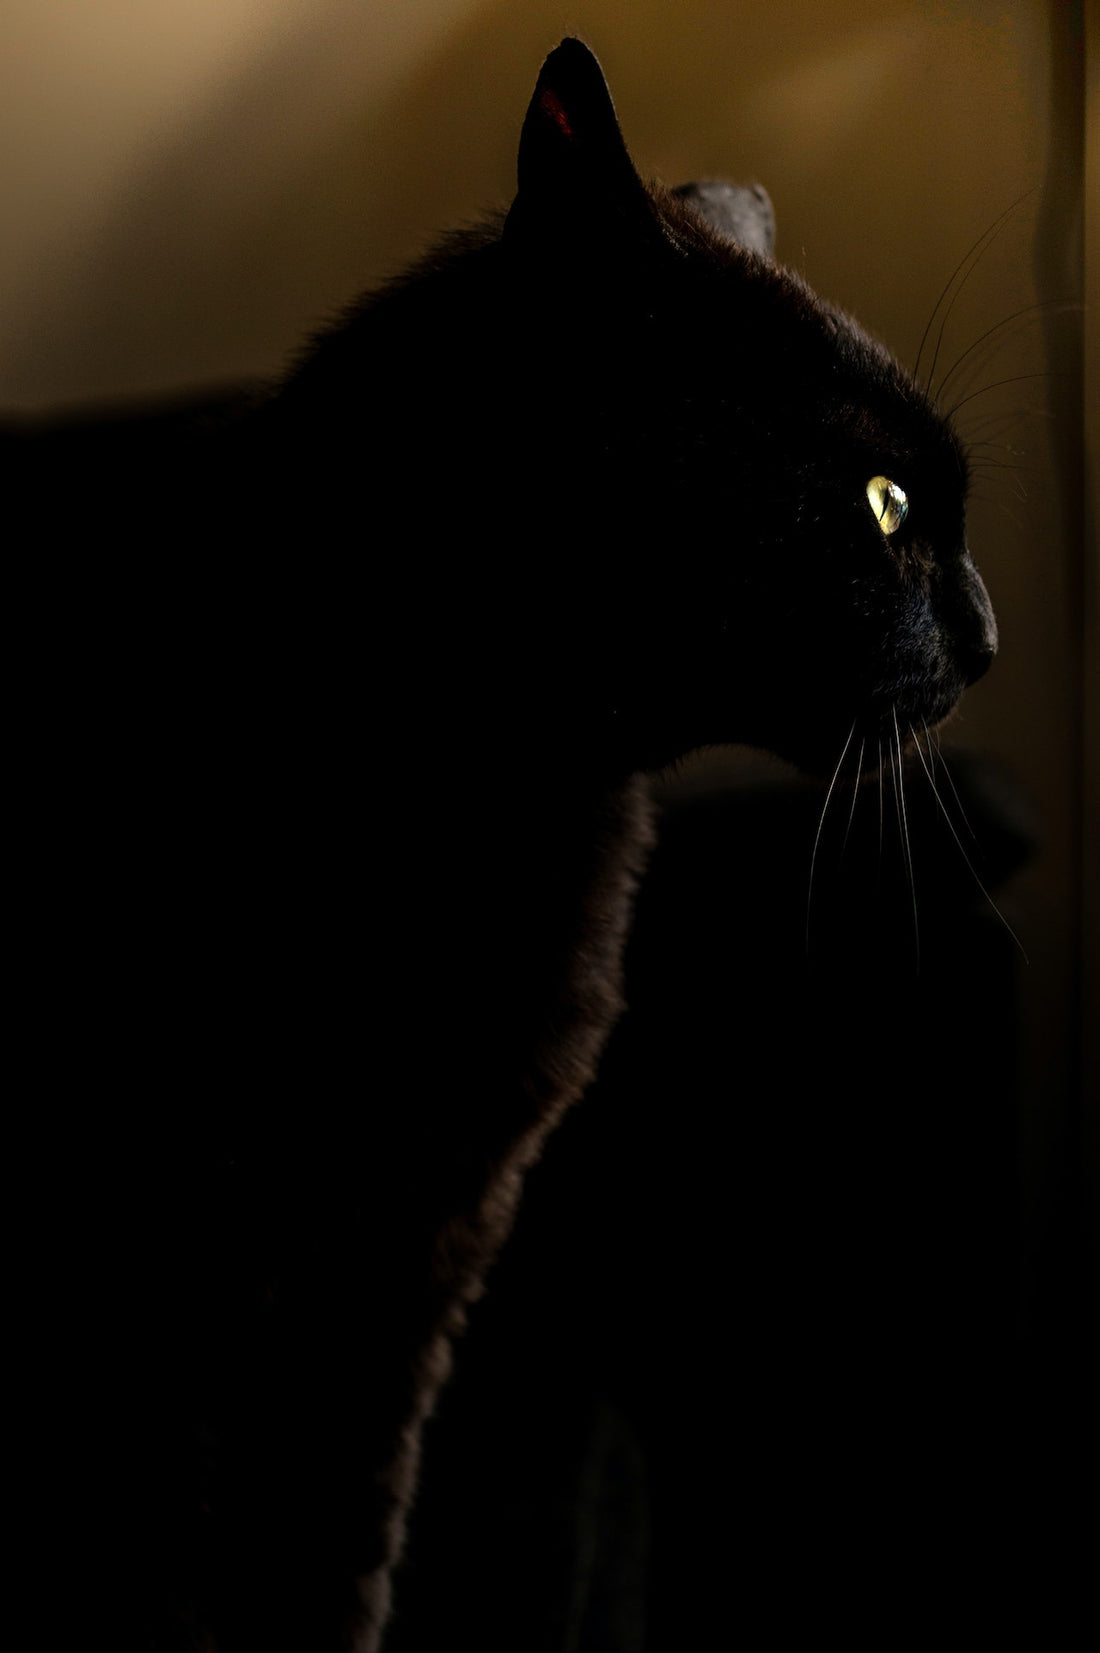 How Do Cats See Well At Night?